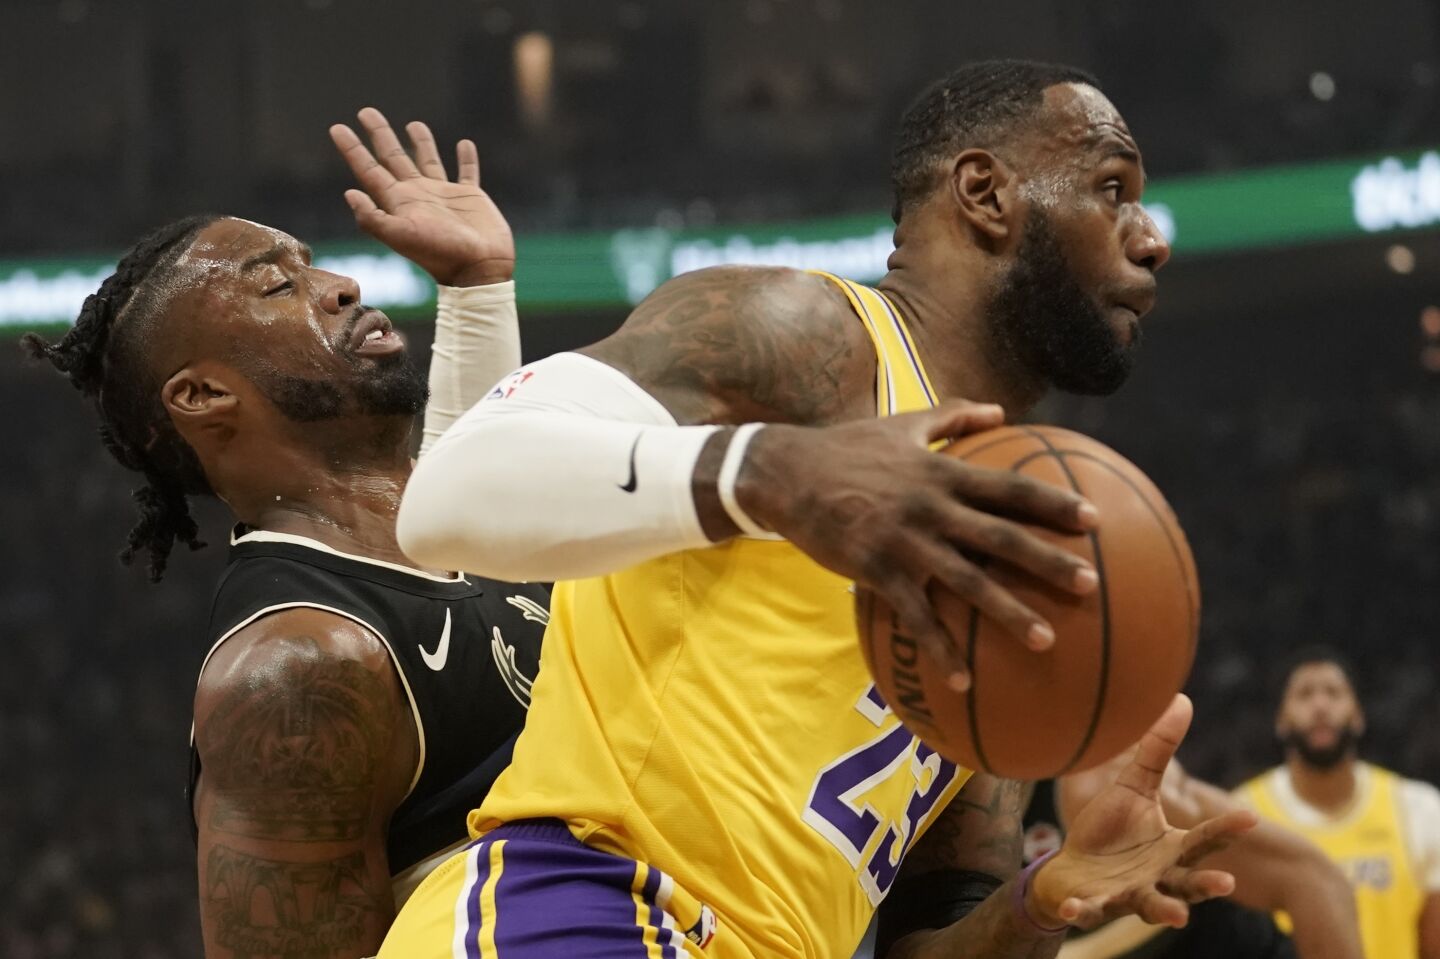 Lakers forward LeBron James drives past Bucks guard Wesley Matthews during the first half of a game Dec. 19.